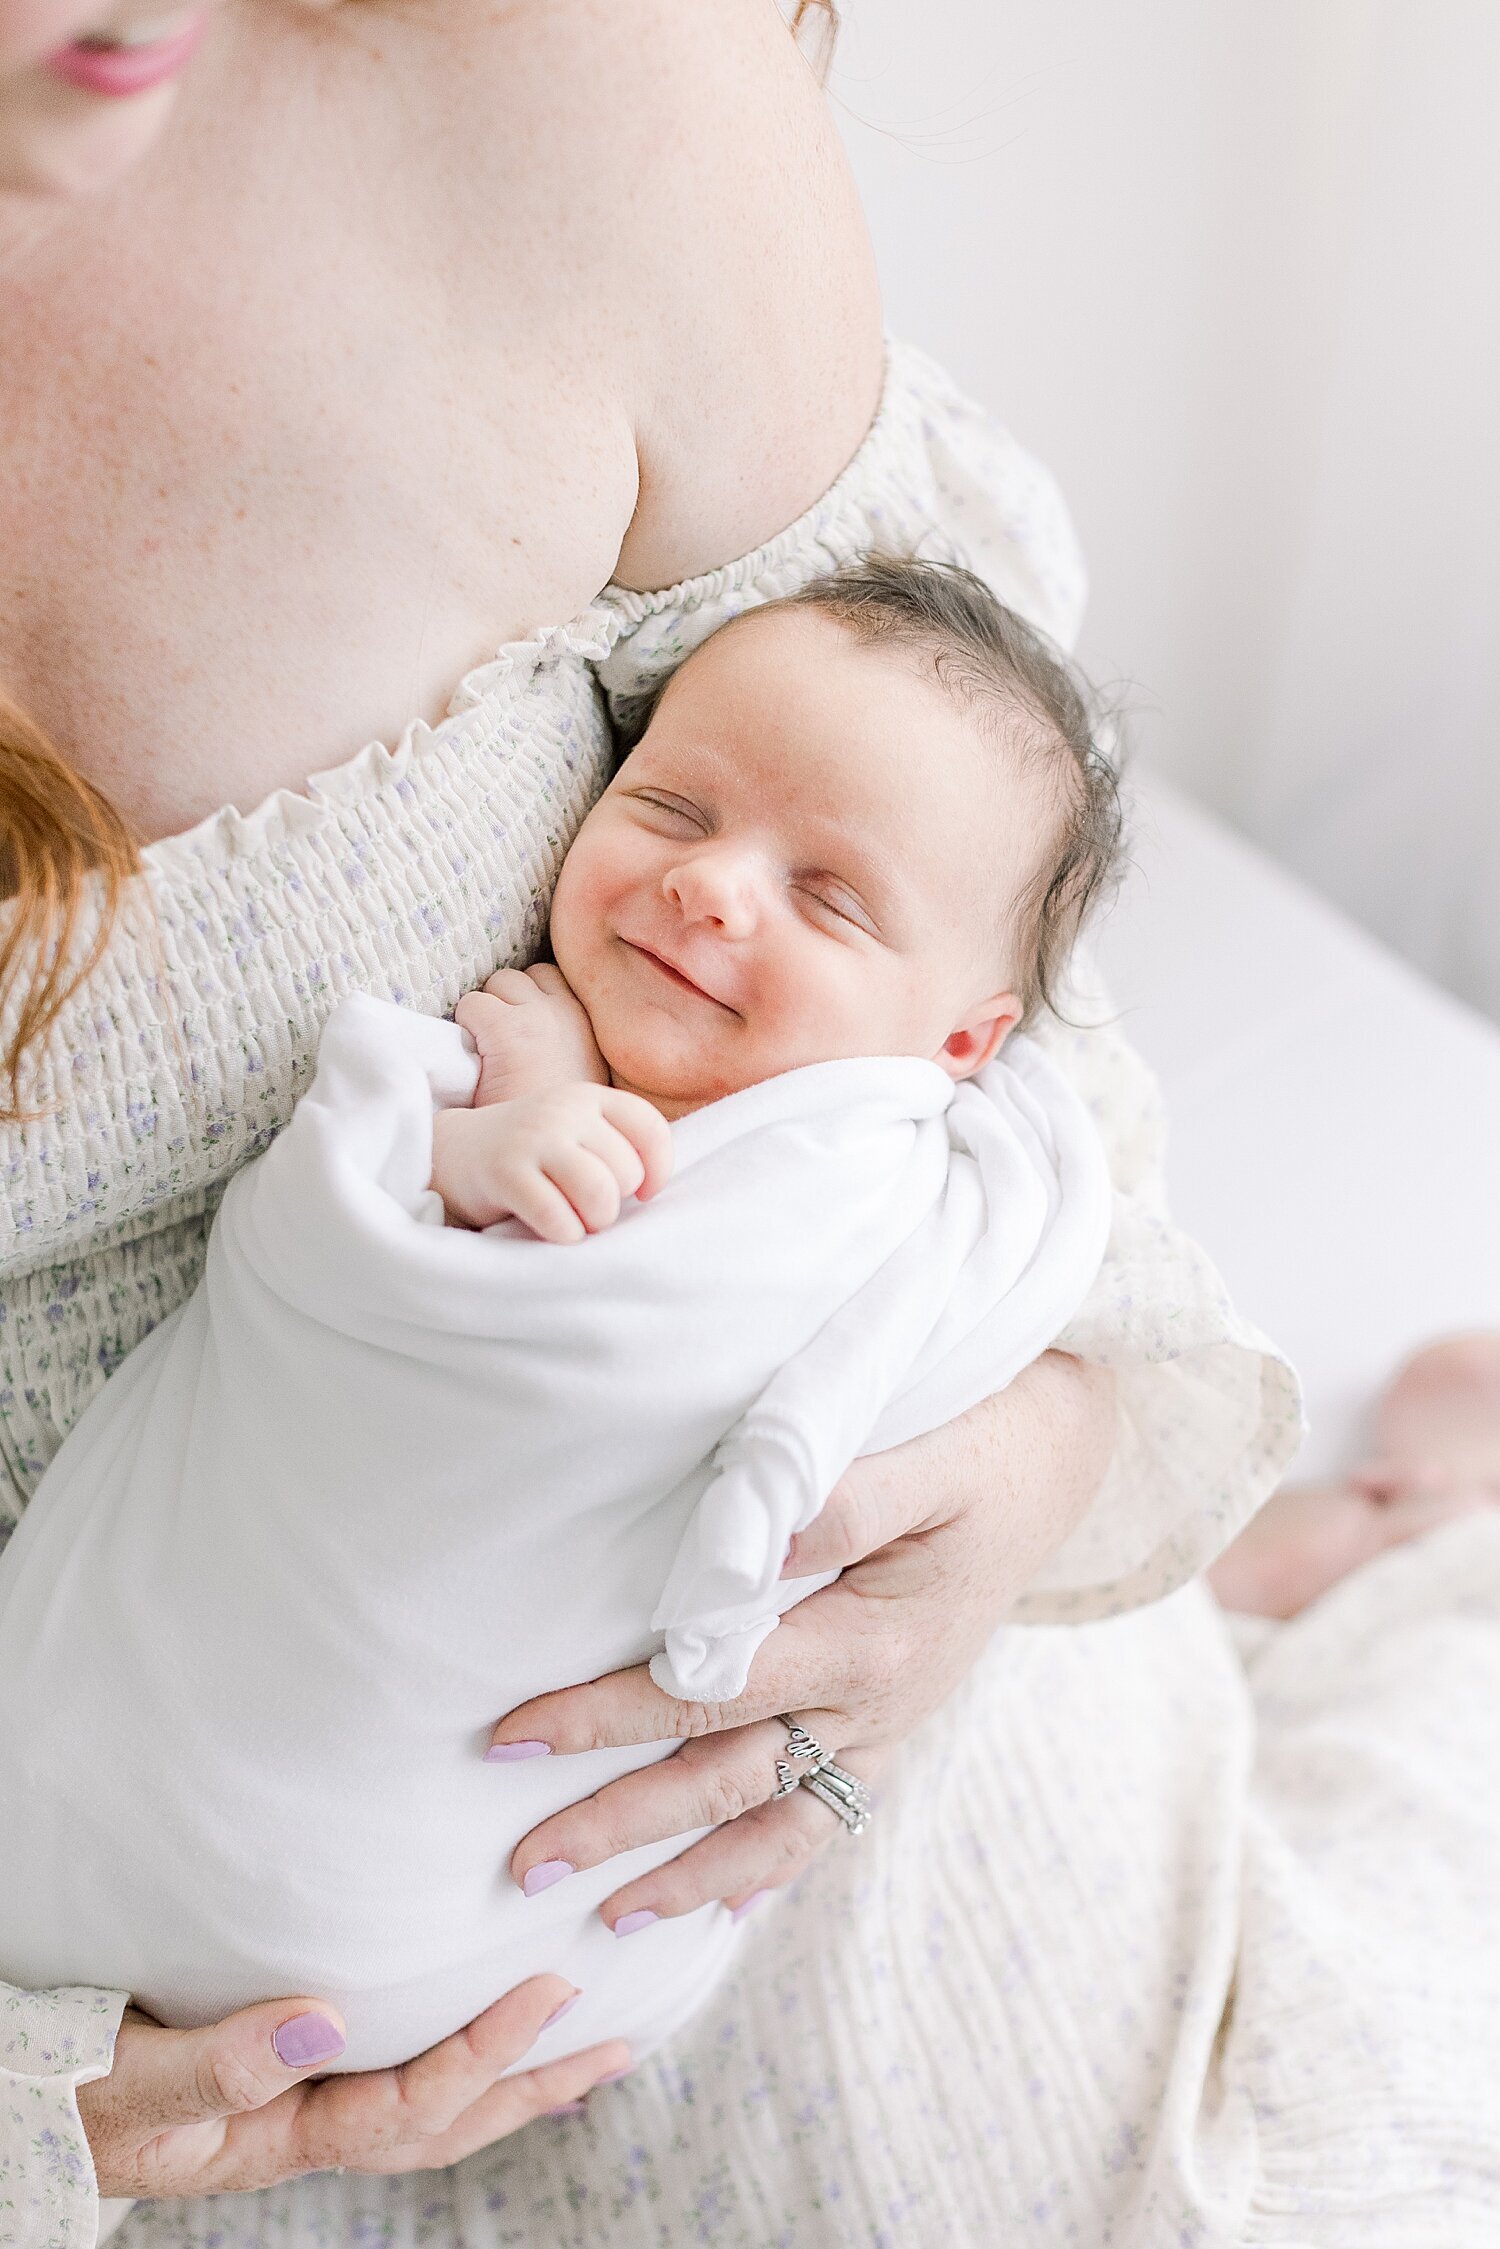 Baby girl smiling during newborn session. Photo by Ambre Williams Photography.